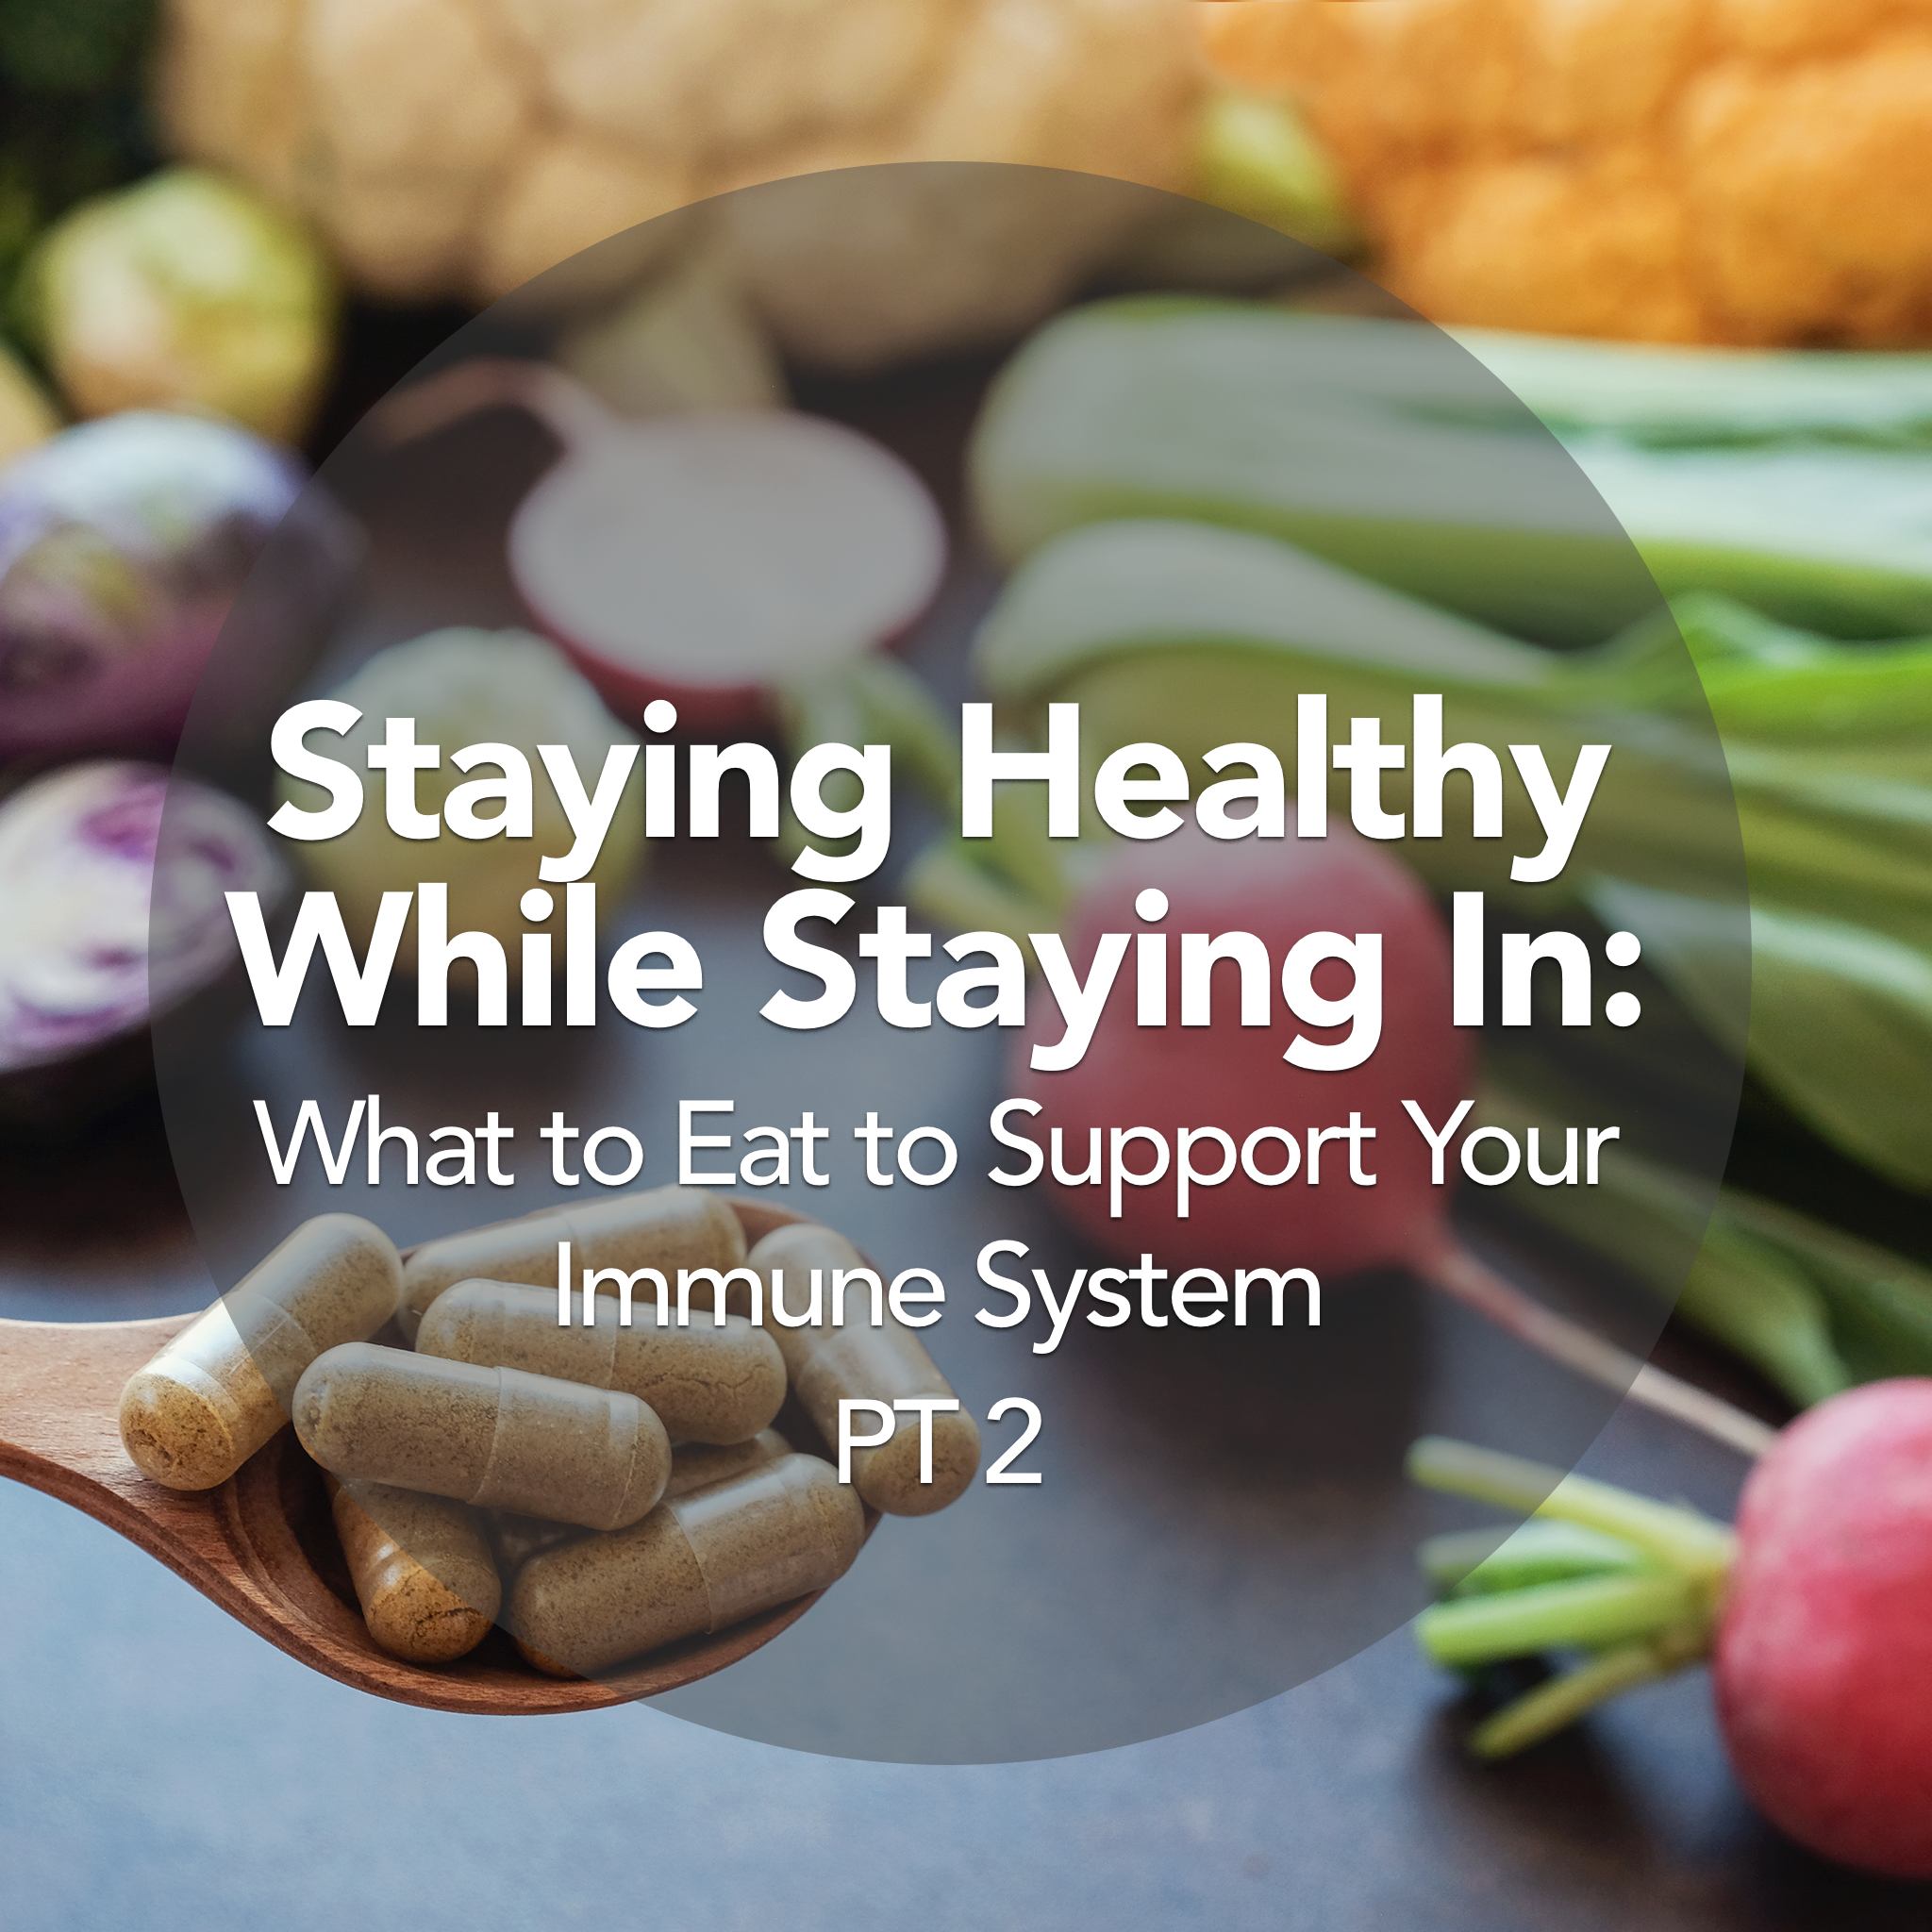 Stay In, Stay Healthy: What to Eat to Support Your Immune System PT 2